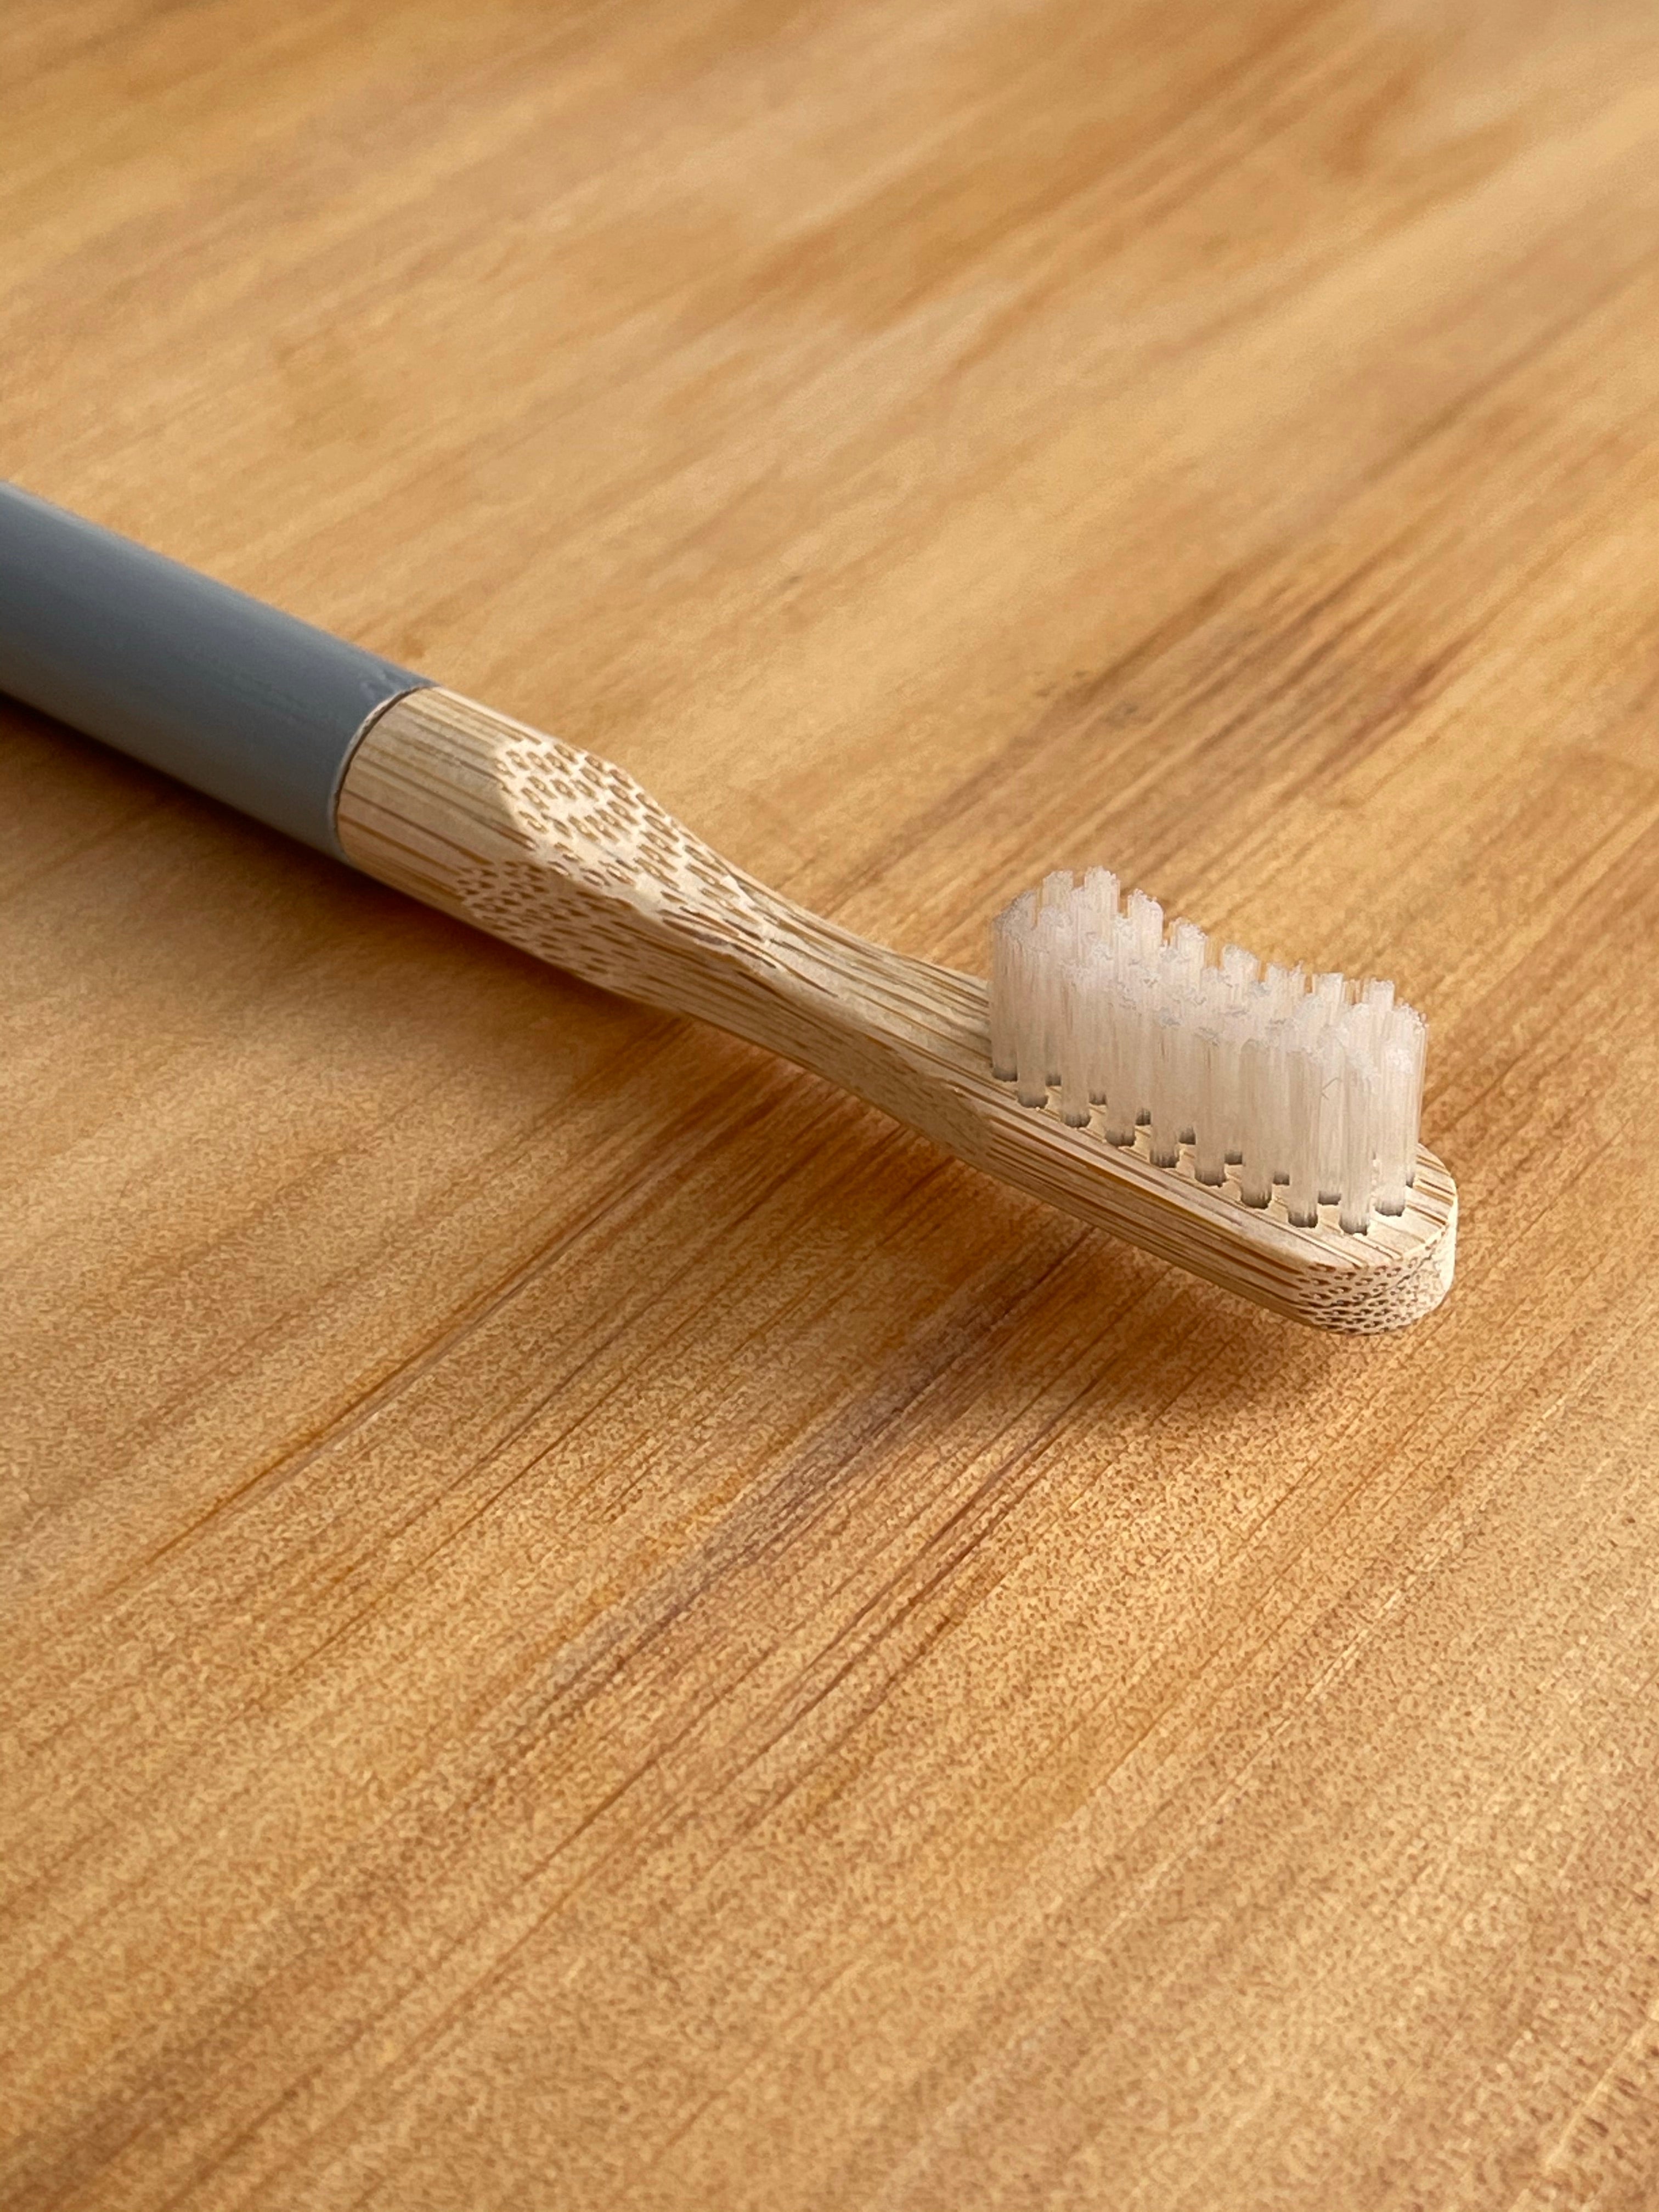 Bamboo Toothbrush - Trial